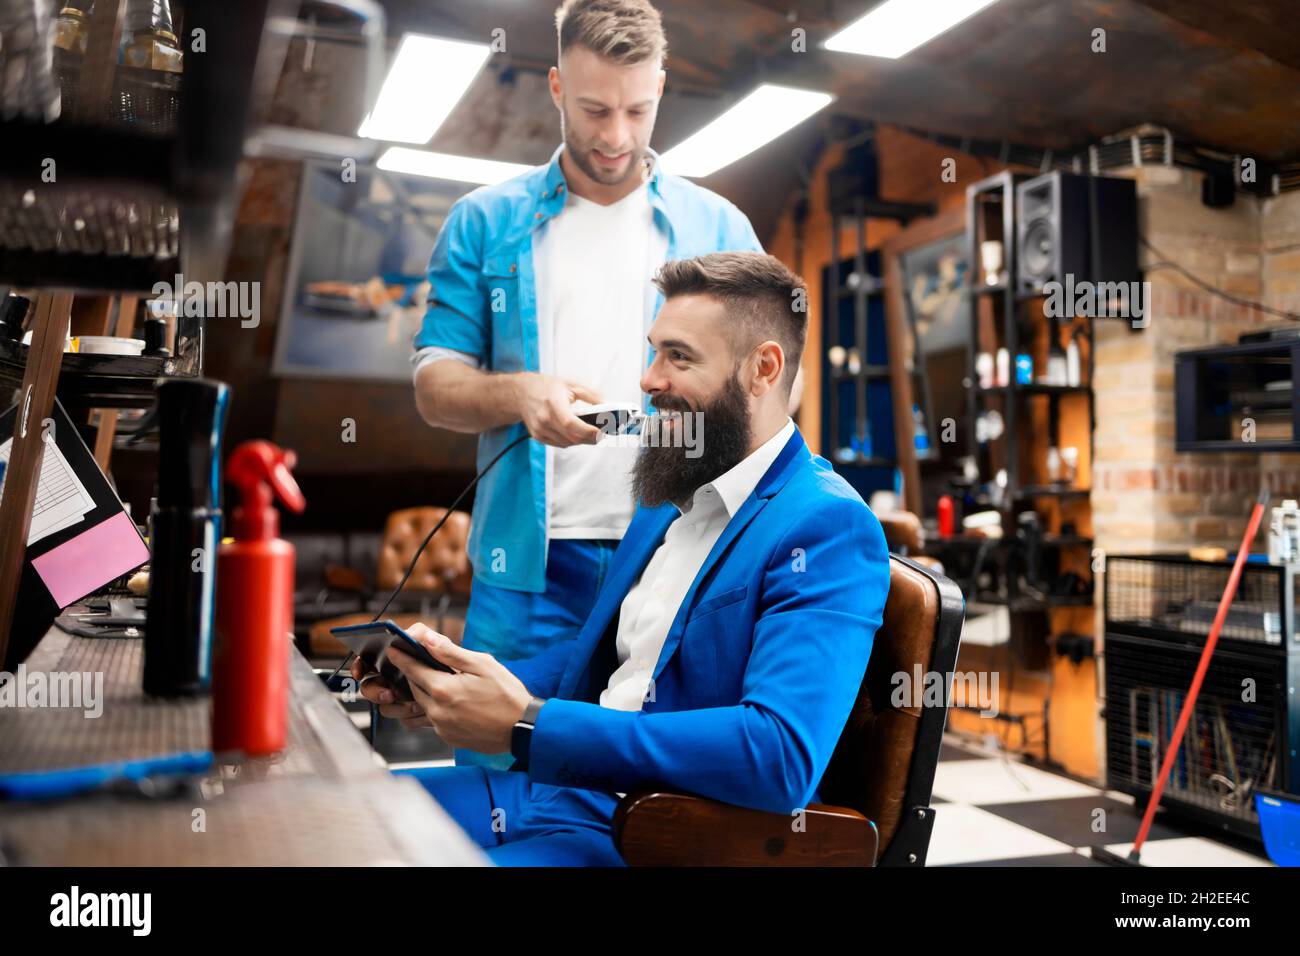 A men getting his beard trimmed in a professional barbershop Stock Photo